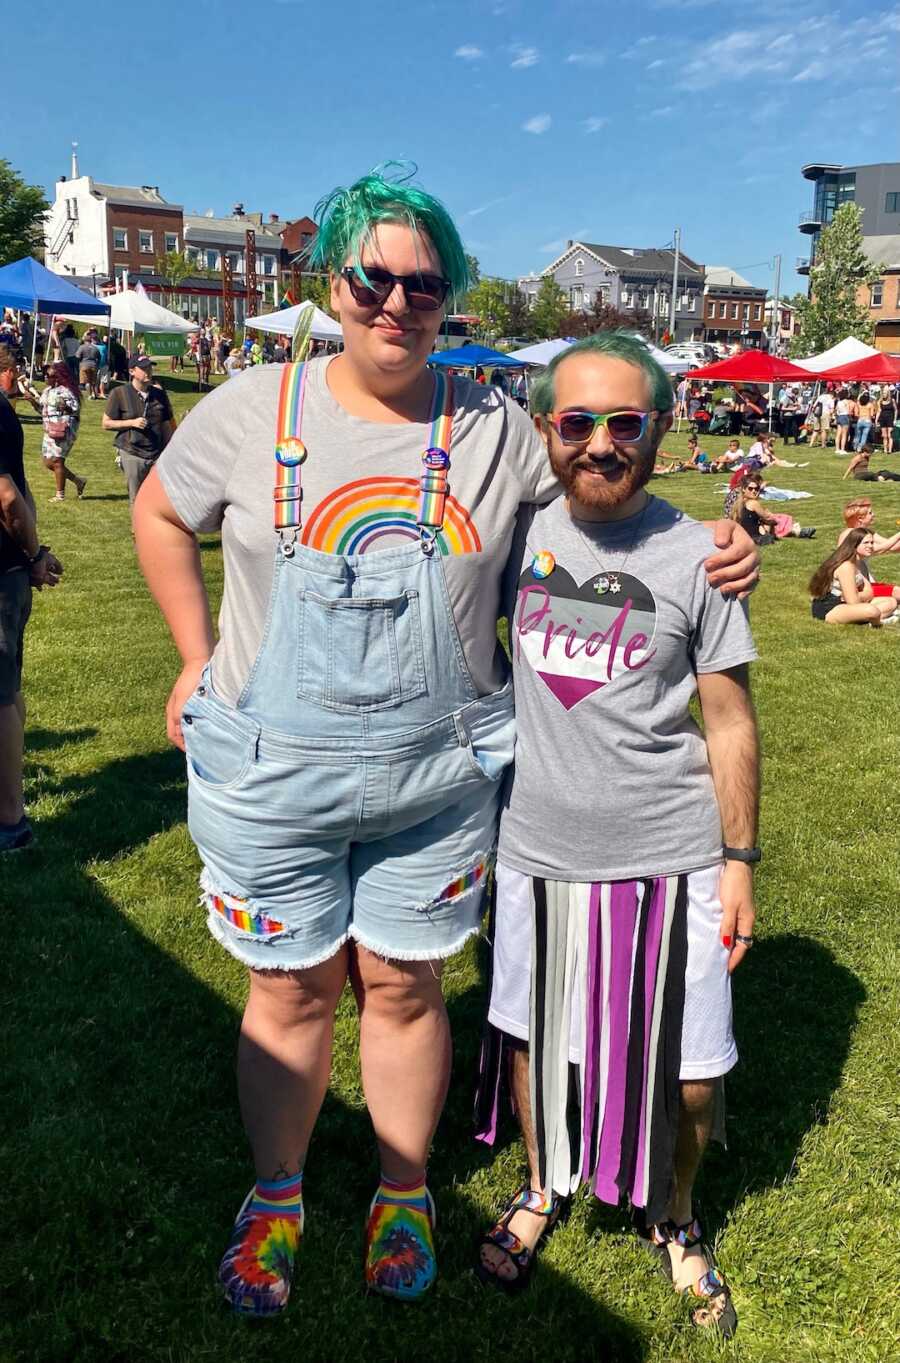 man and woman at pride event